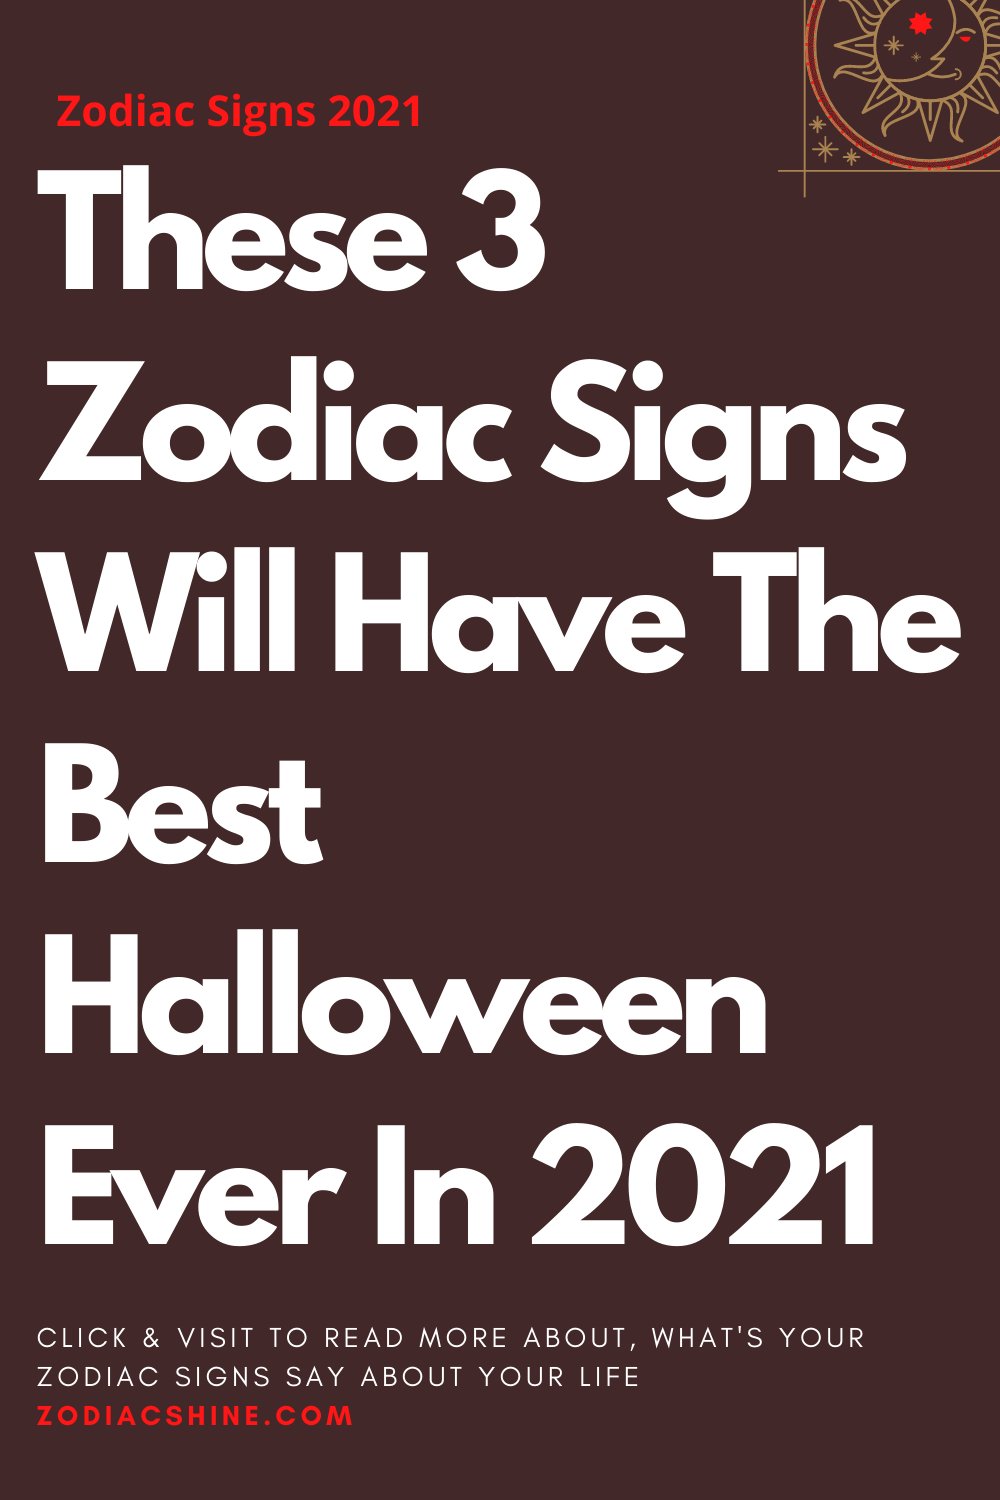 These 3 Zodiac Signs Will Have The Best Halloween Ever In 2021